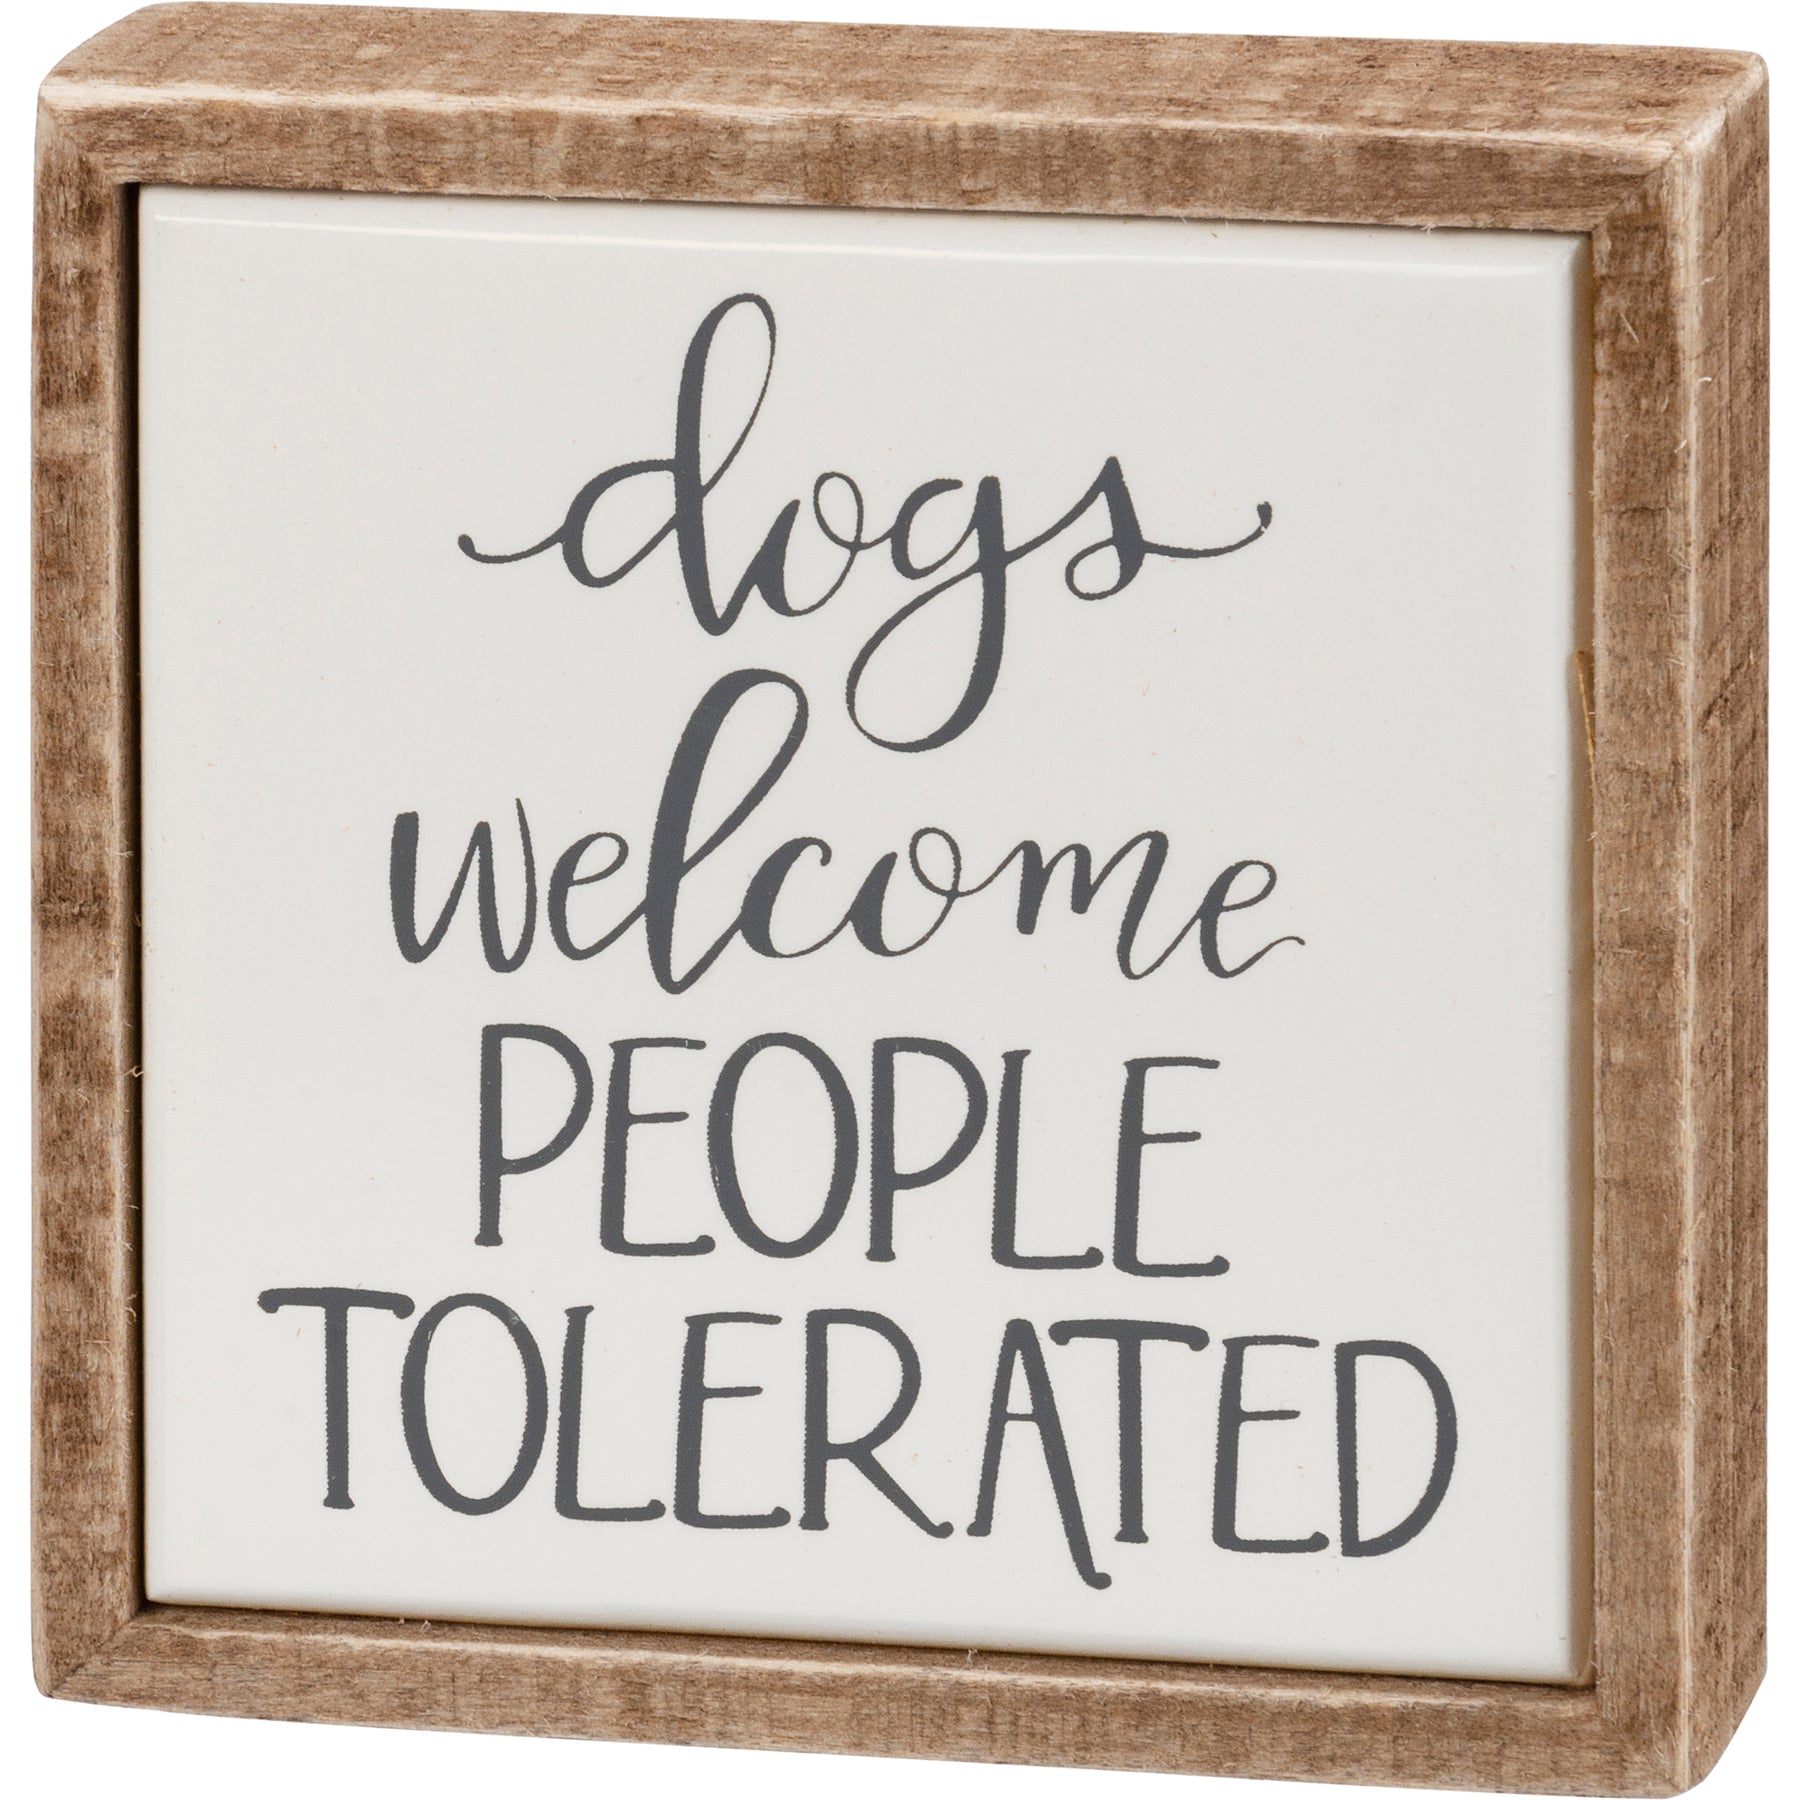 Dogs welcome people tolerated 4 inch x 4 inch mini wooden block sign 